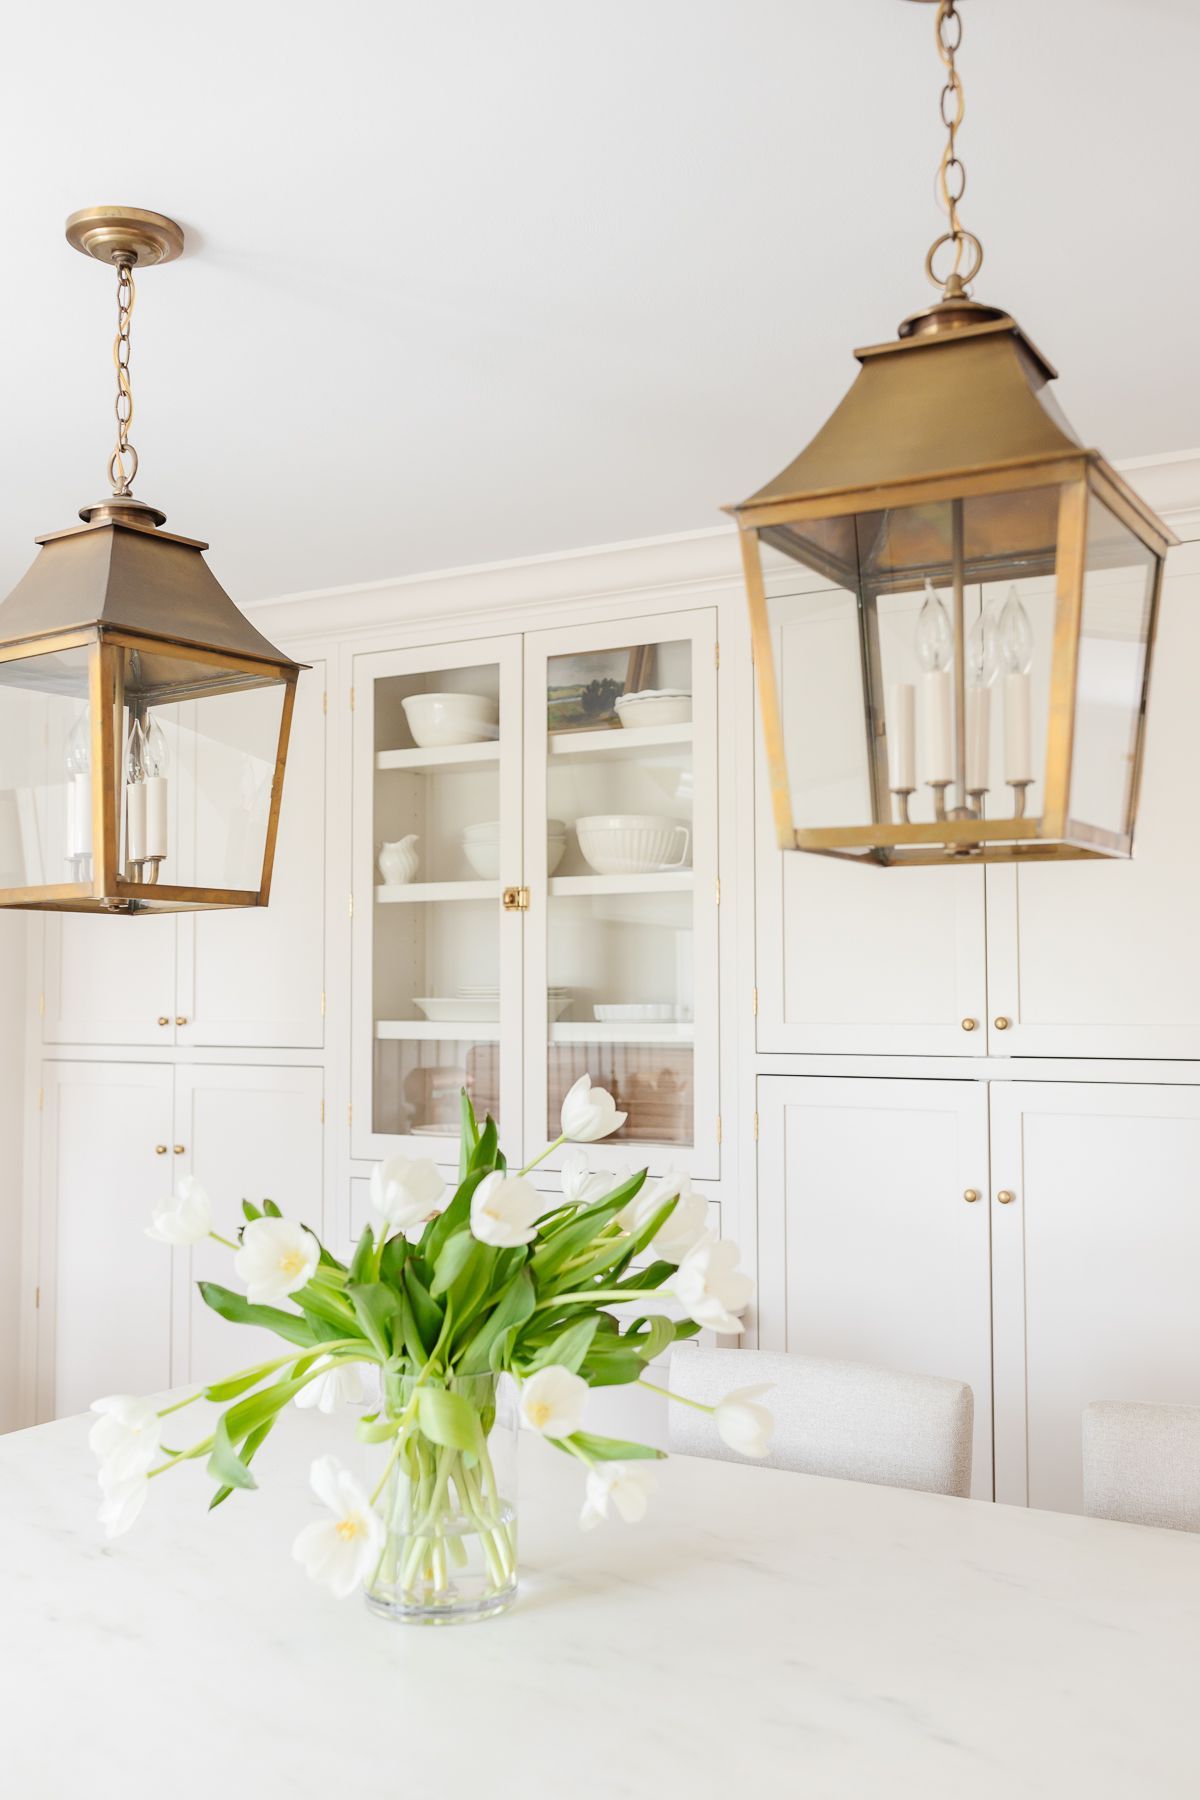 Widely Used Brass Lantern Pendant Lights (View 4 of 15)